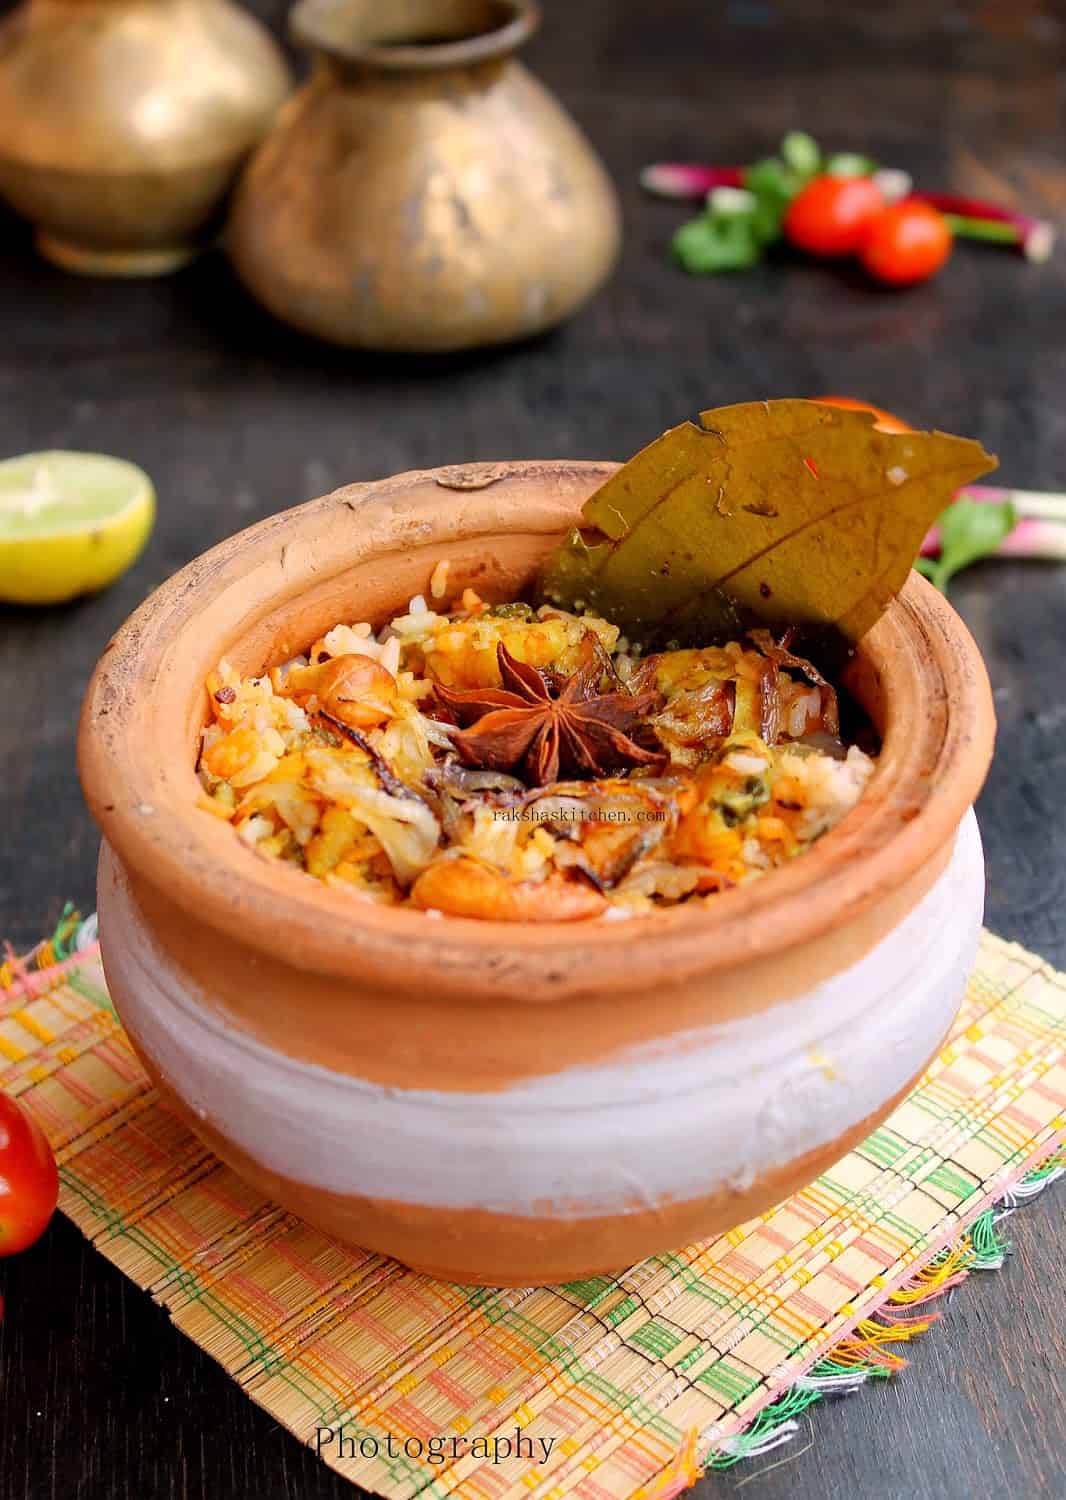 Clay Biriyani Pot With Lid -Small – South Indian Grocery